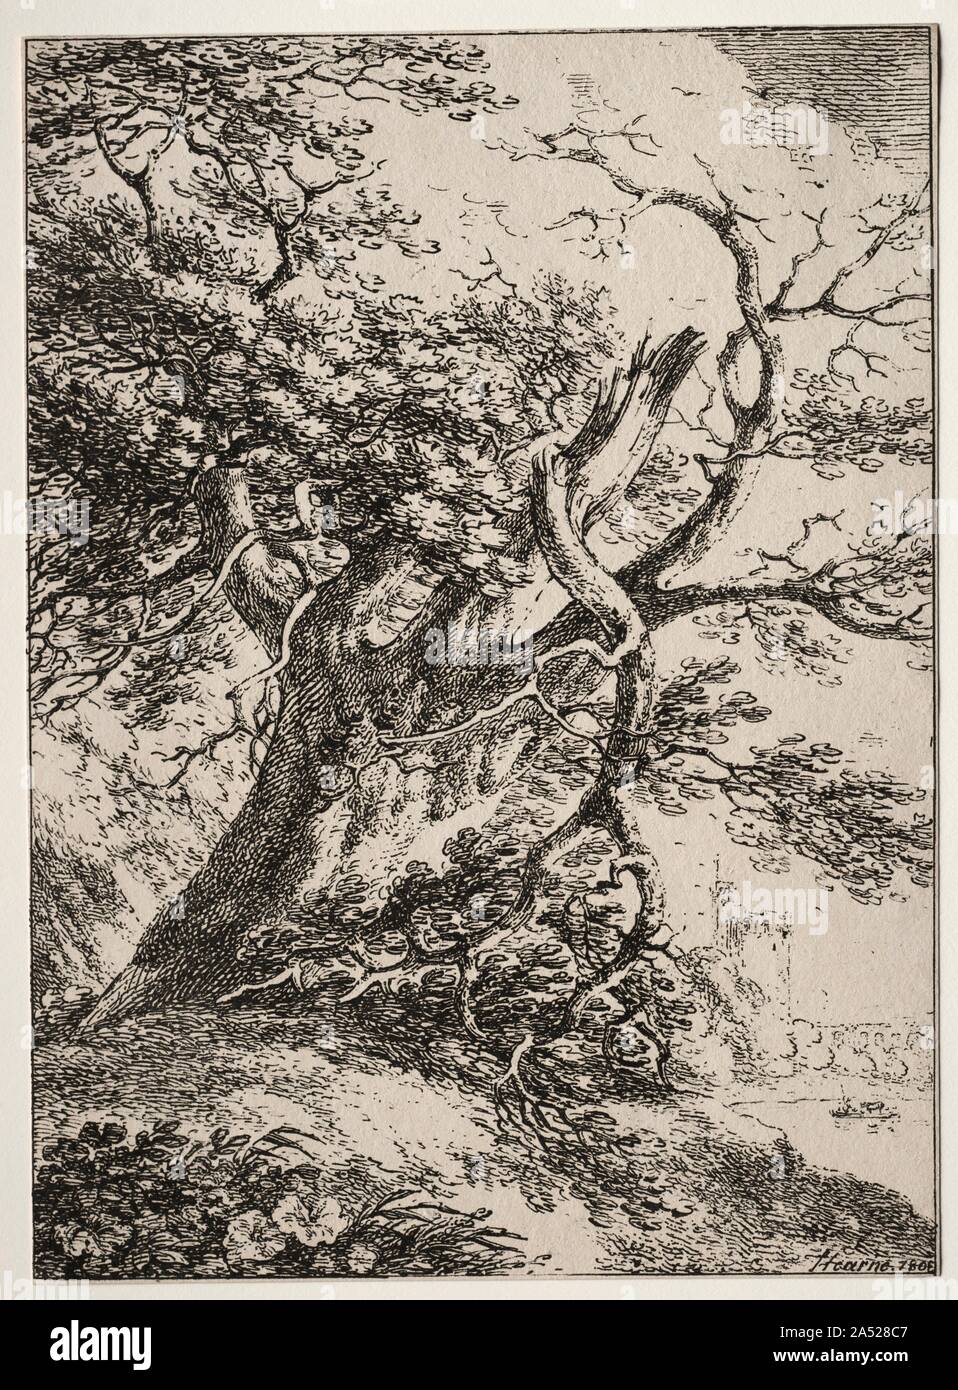 Specimens of Polyautography: Landscape with an Oak Tree, 1803. The first portfolio of artists&#x2019; lithographs was published in 1803, just five years after Alois Senefelder invented the medium in Munich in 1798. Entitled Specimens of Polyautography, the publication included twelve lithographs by British, French, German, and Swiss artists. Figures contemplating the landscape and atmospheric tree studies were dominant subjects among these early pen lithographs. Stock Photo